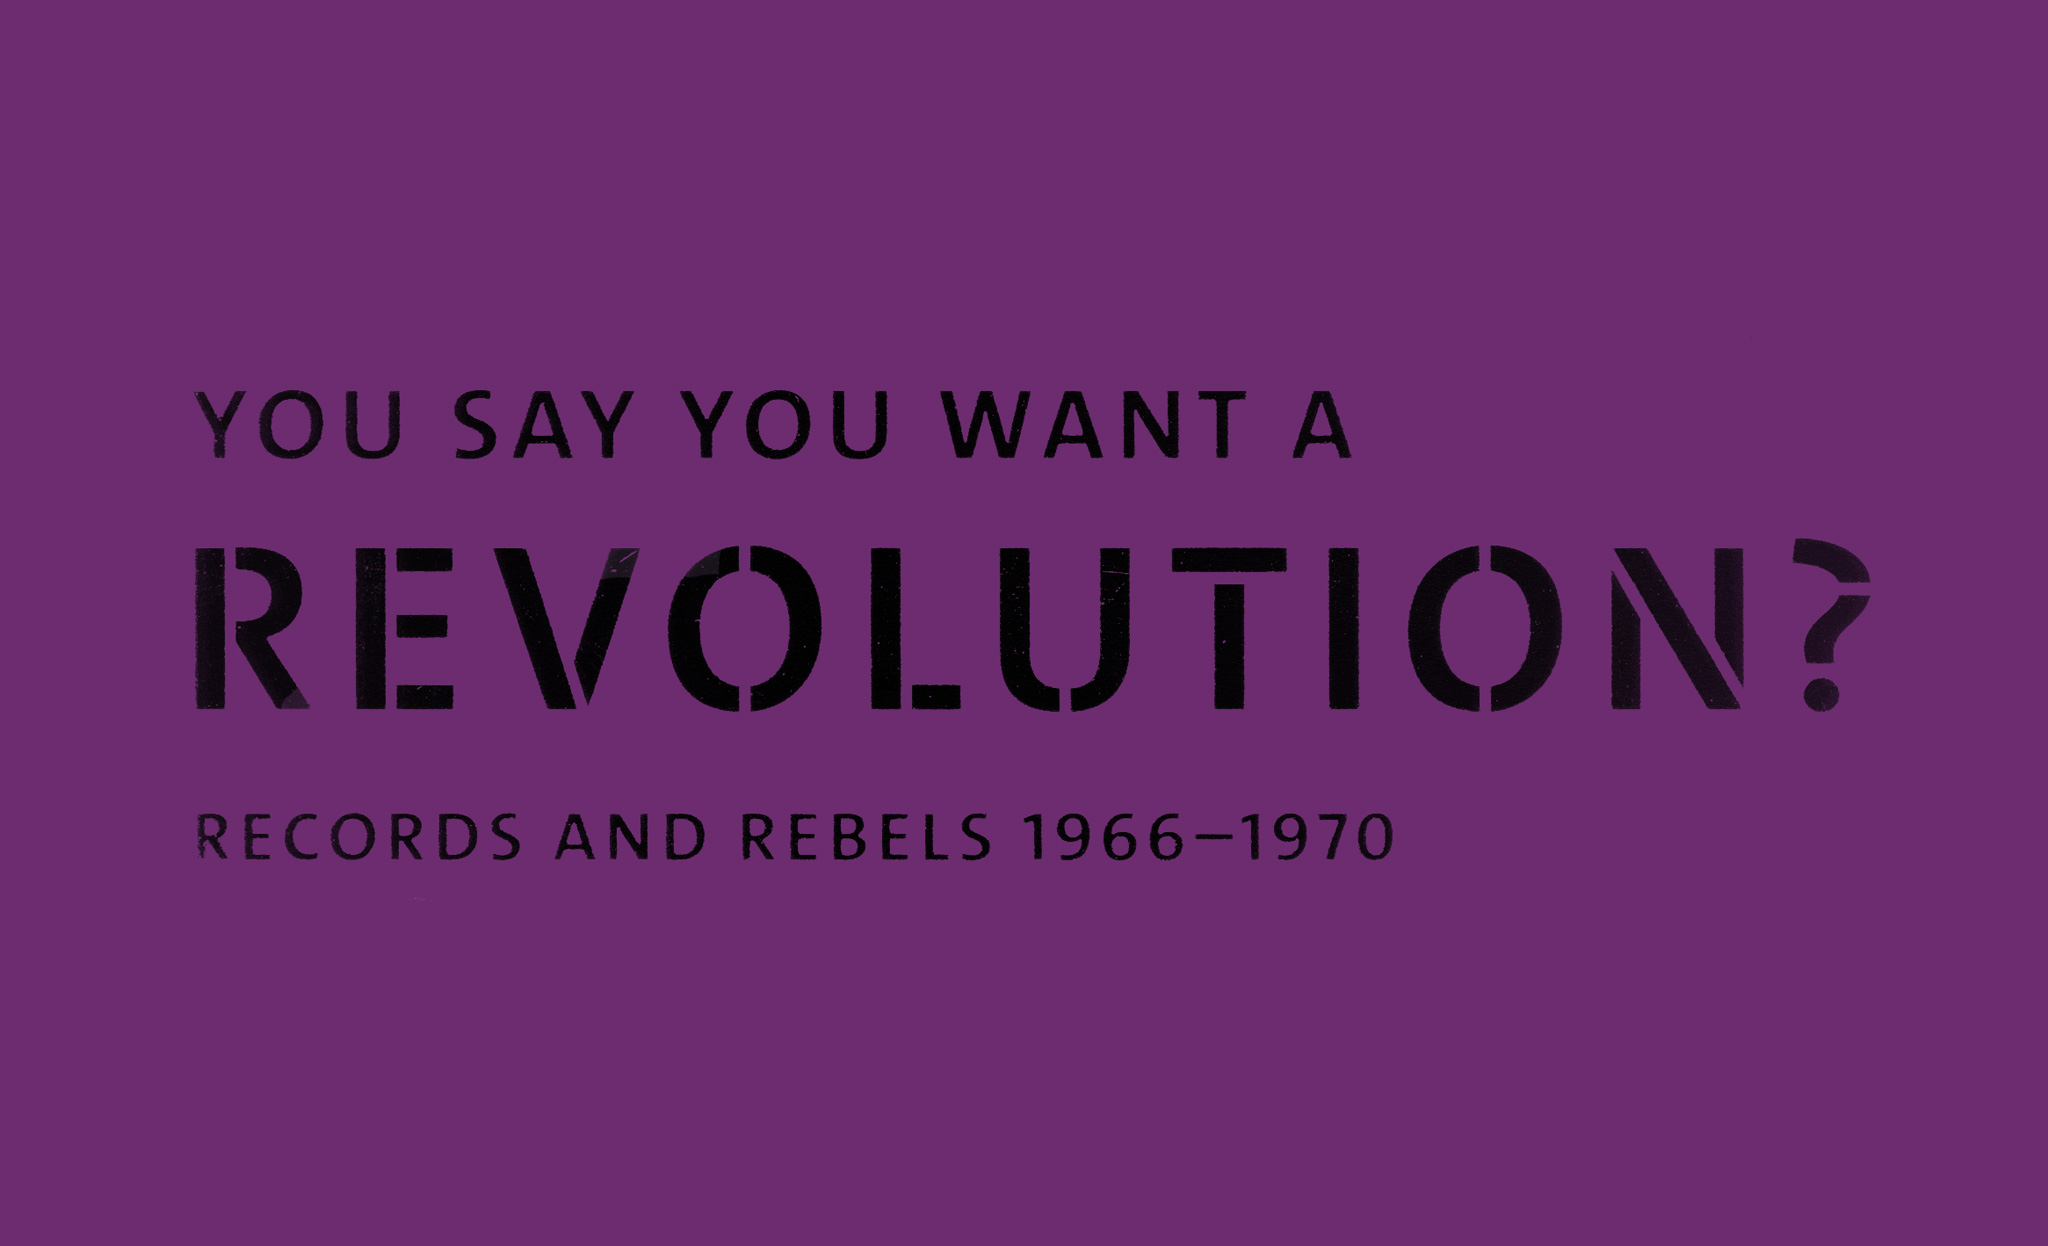 You Say You Want A Revolution?